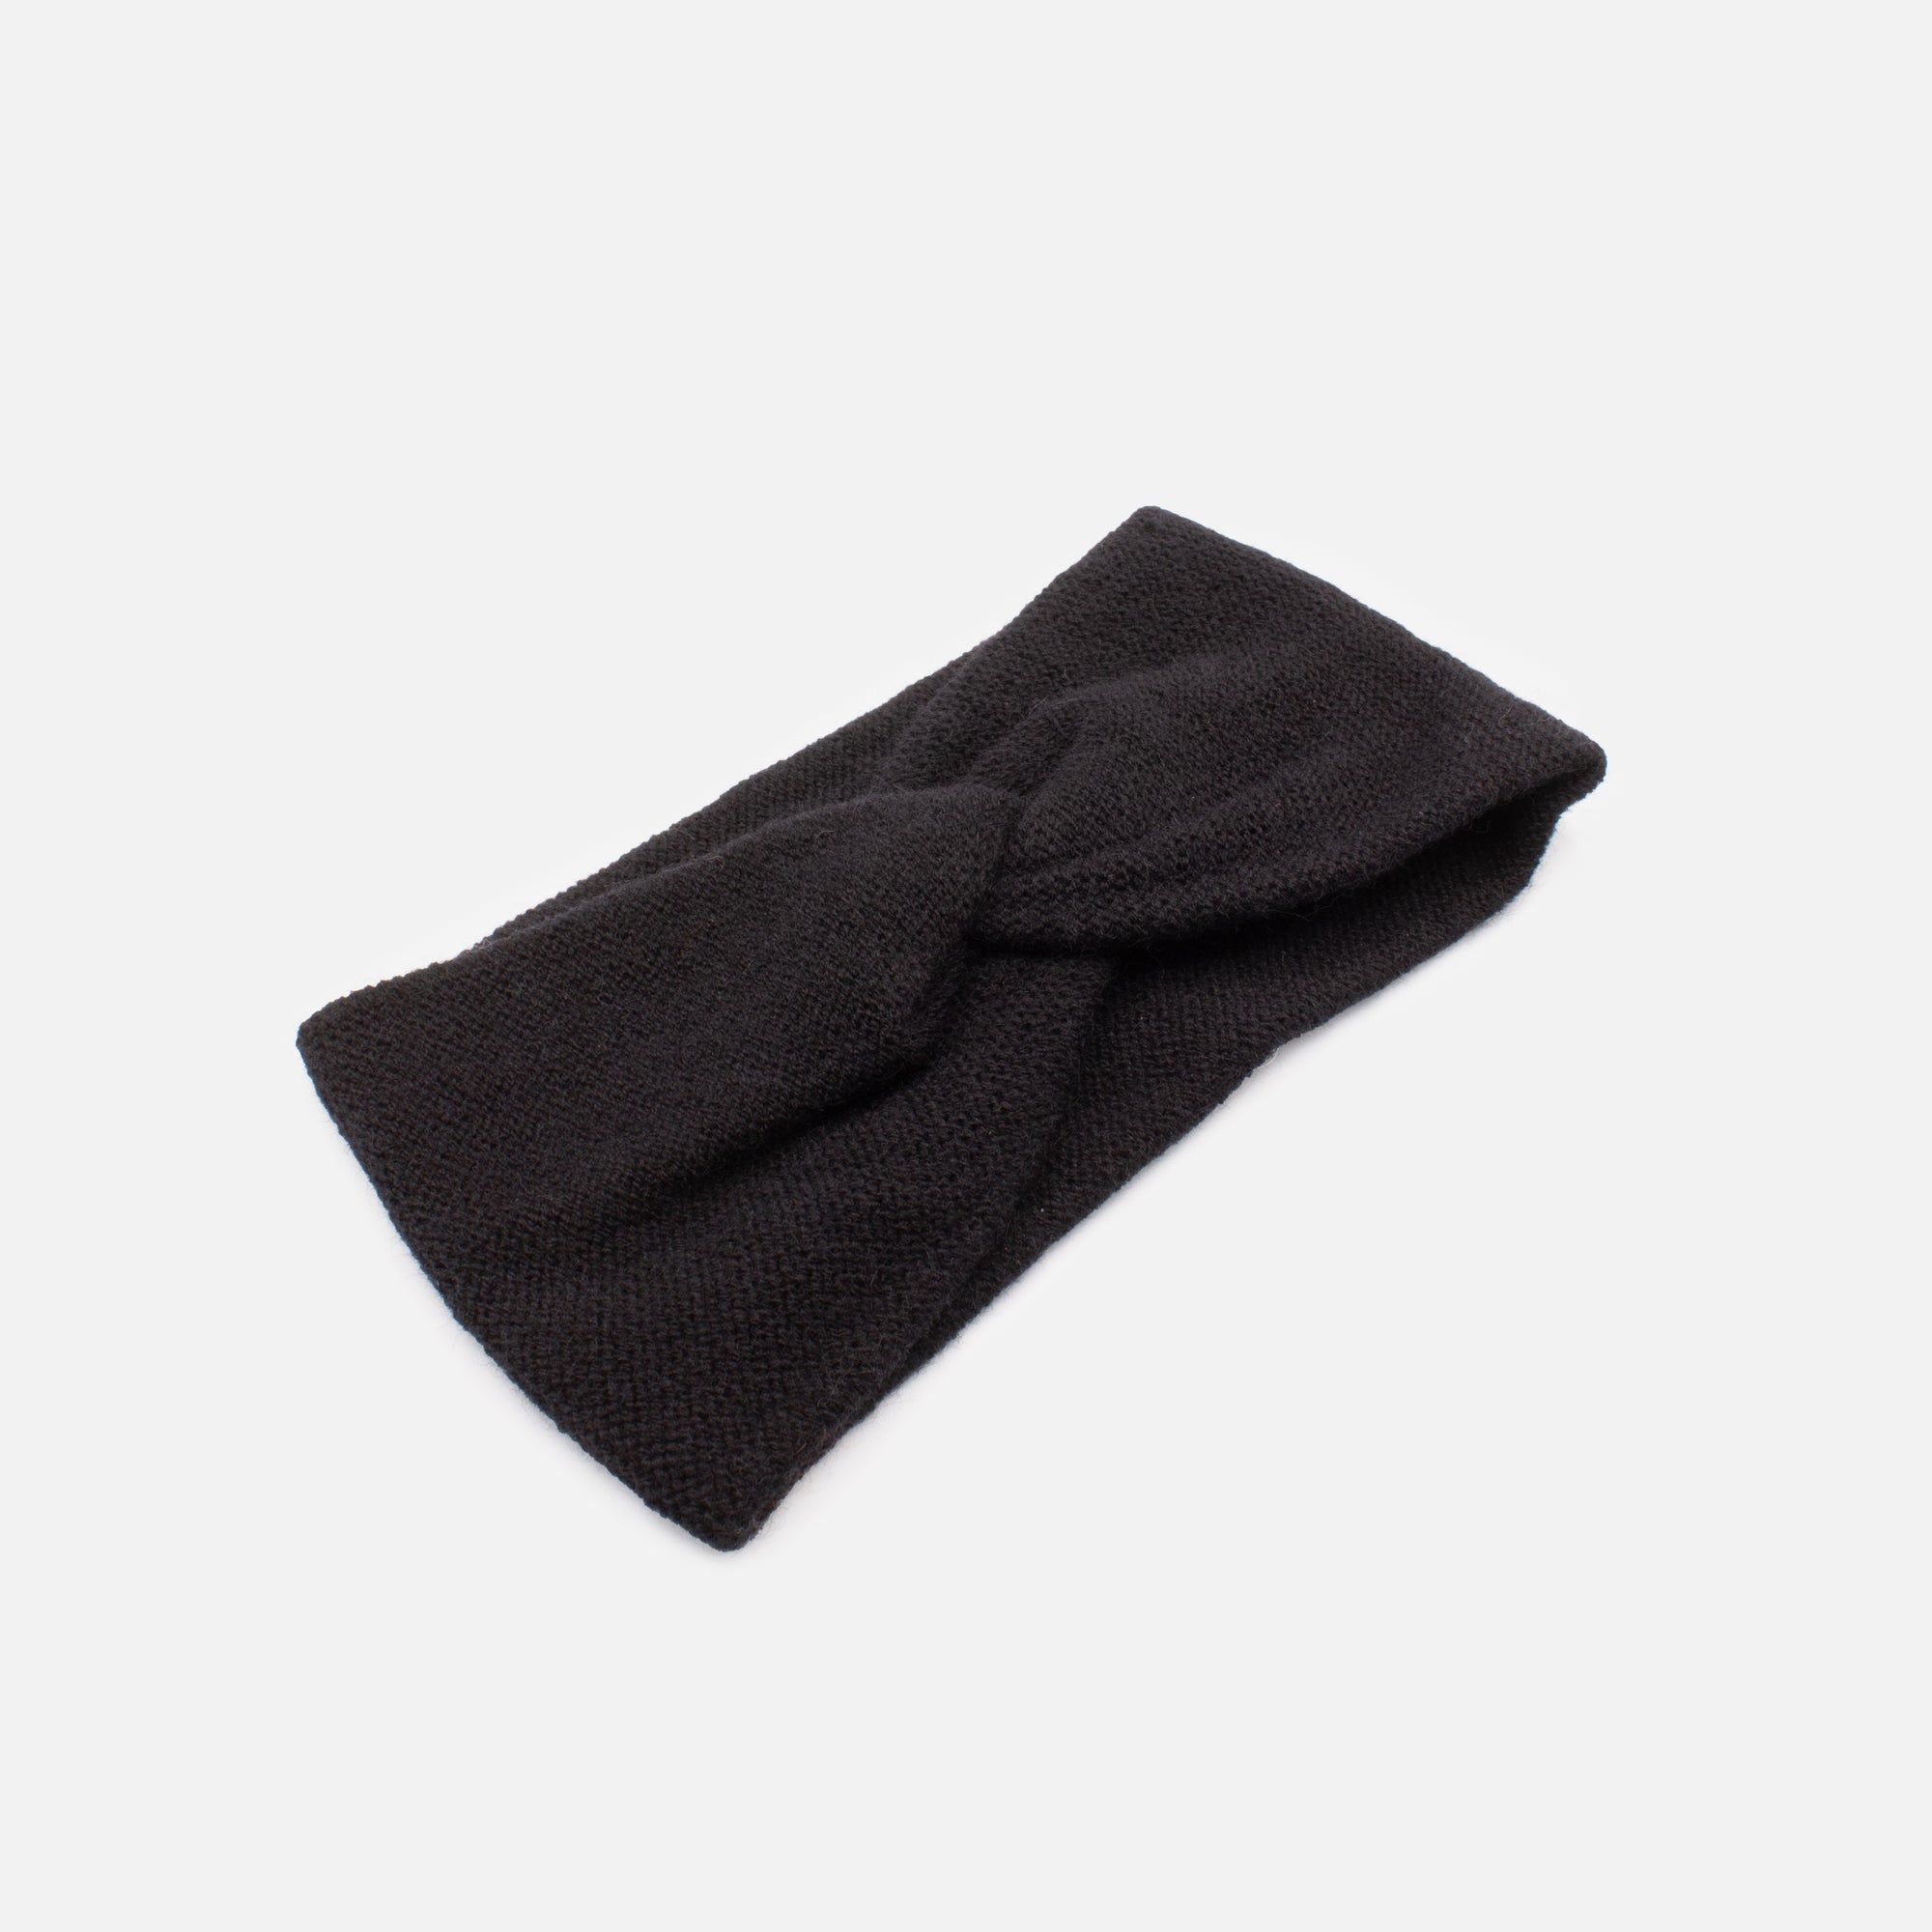 Black small knit headband with buckle